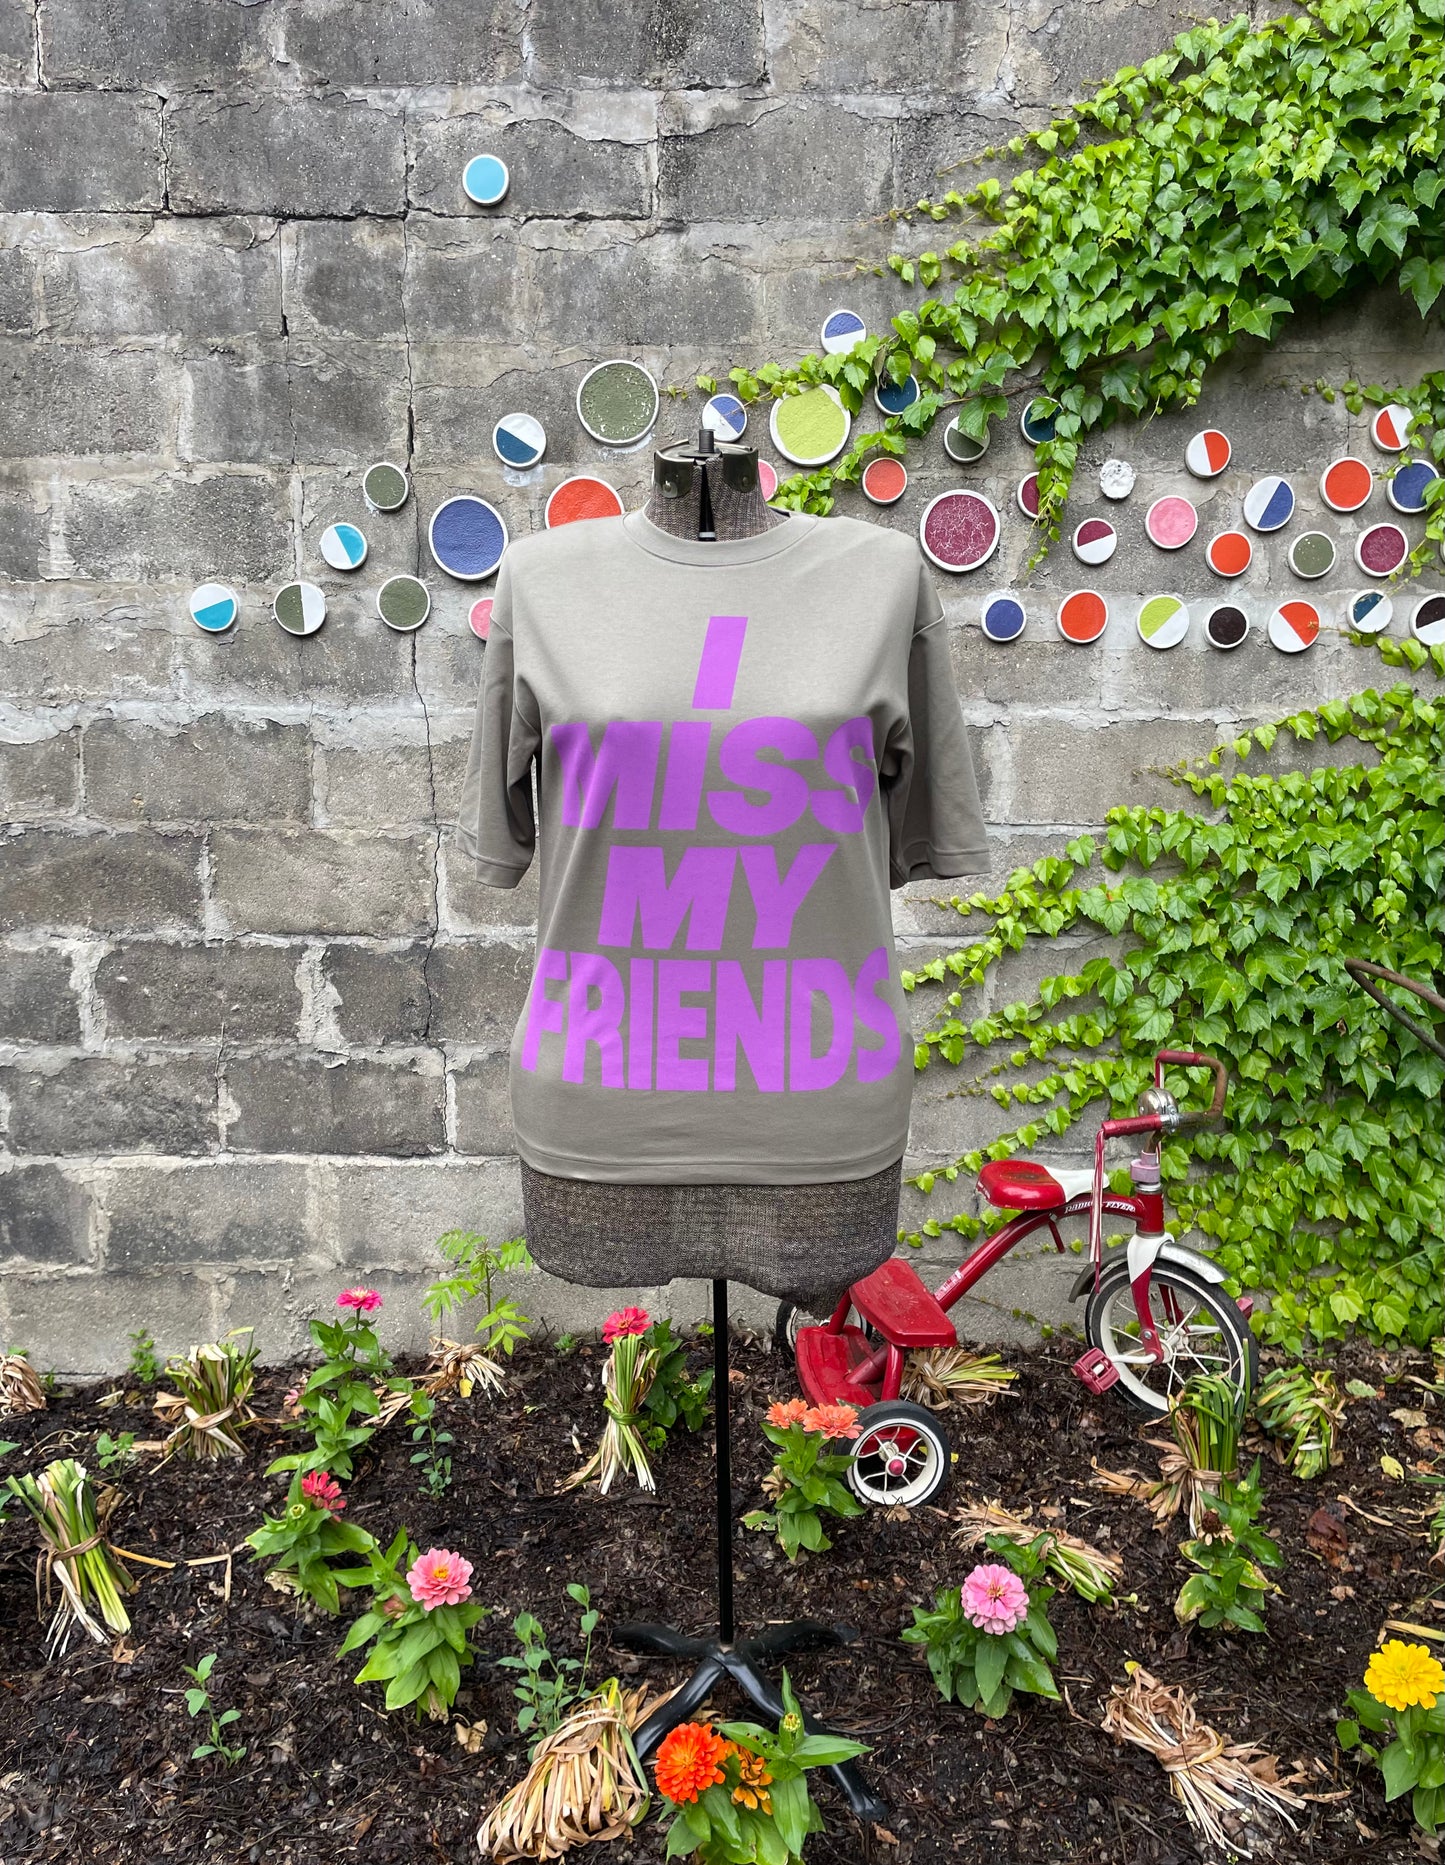 Gifted I Miss My Friends Tee